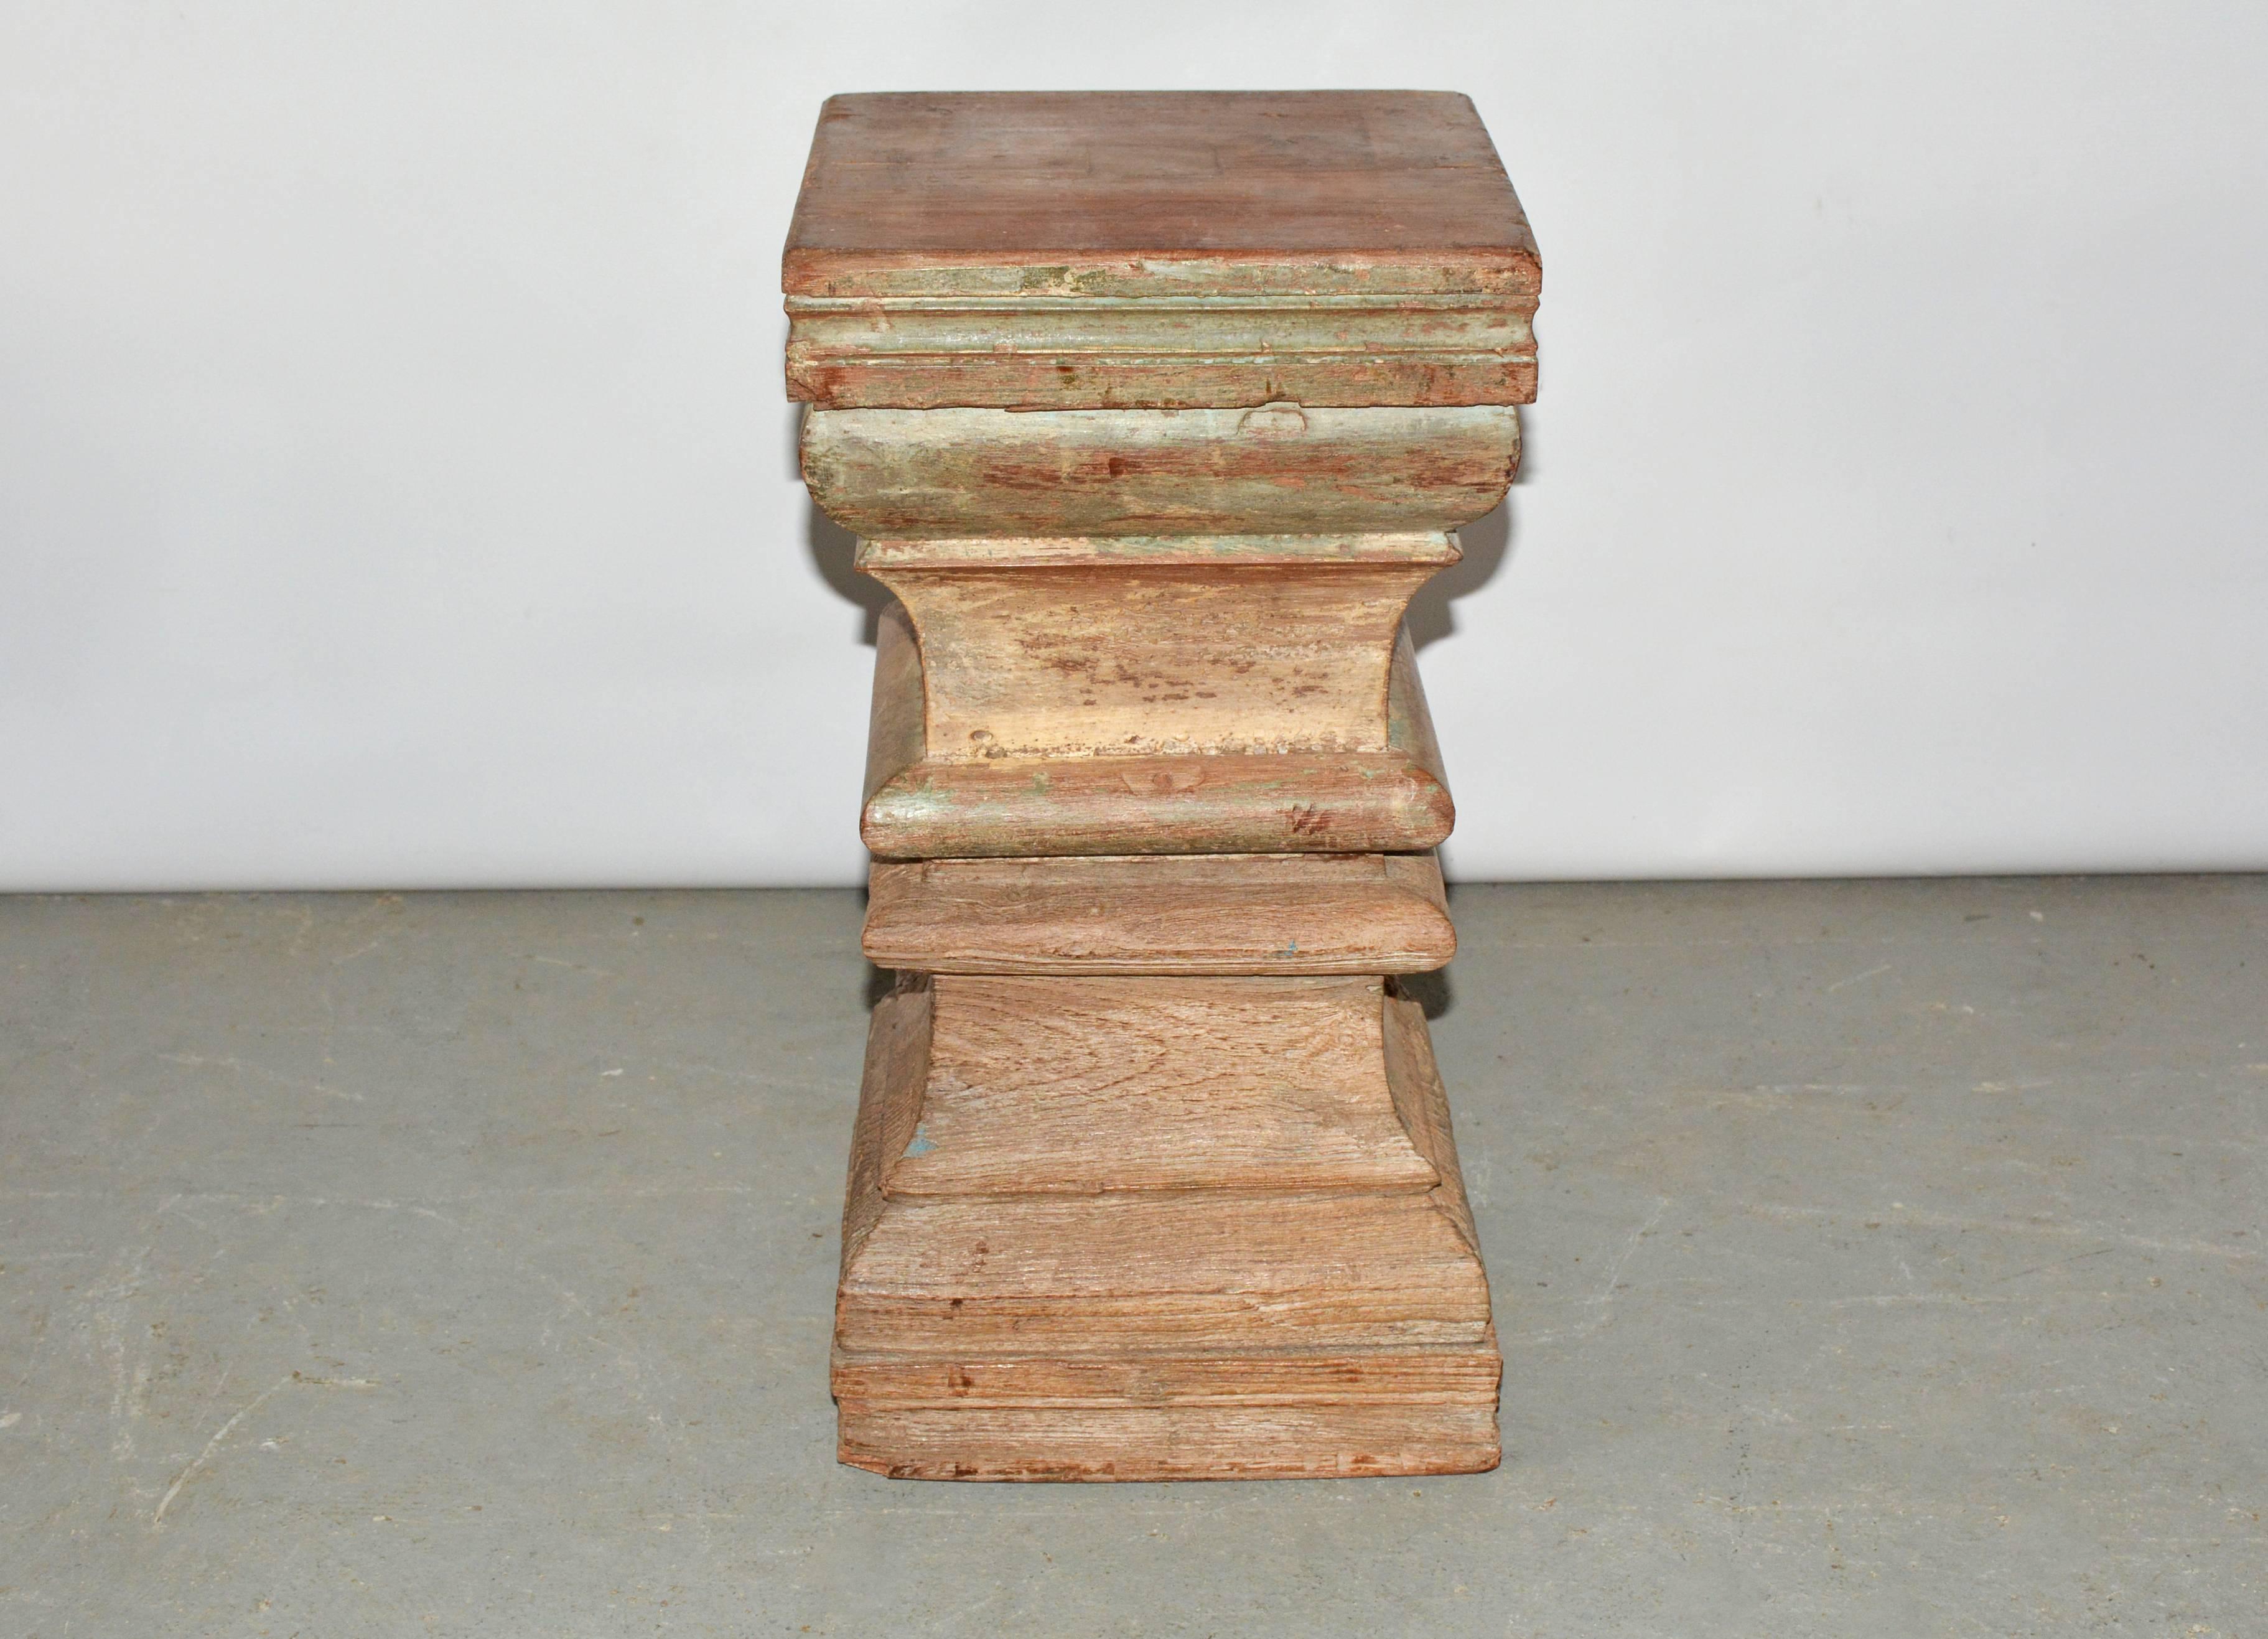 Unique Indian carved wood plinth table base or stool. Beautifully hand-carved with wonderful wood patina showing remnant of green paint. Once part of a column. Reduced to a size usable as end table, occasional table or stool for extra seating.